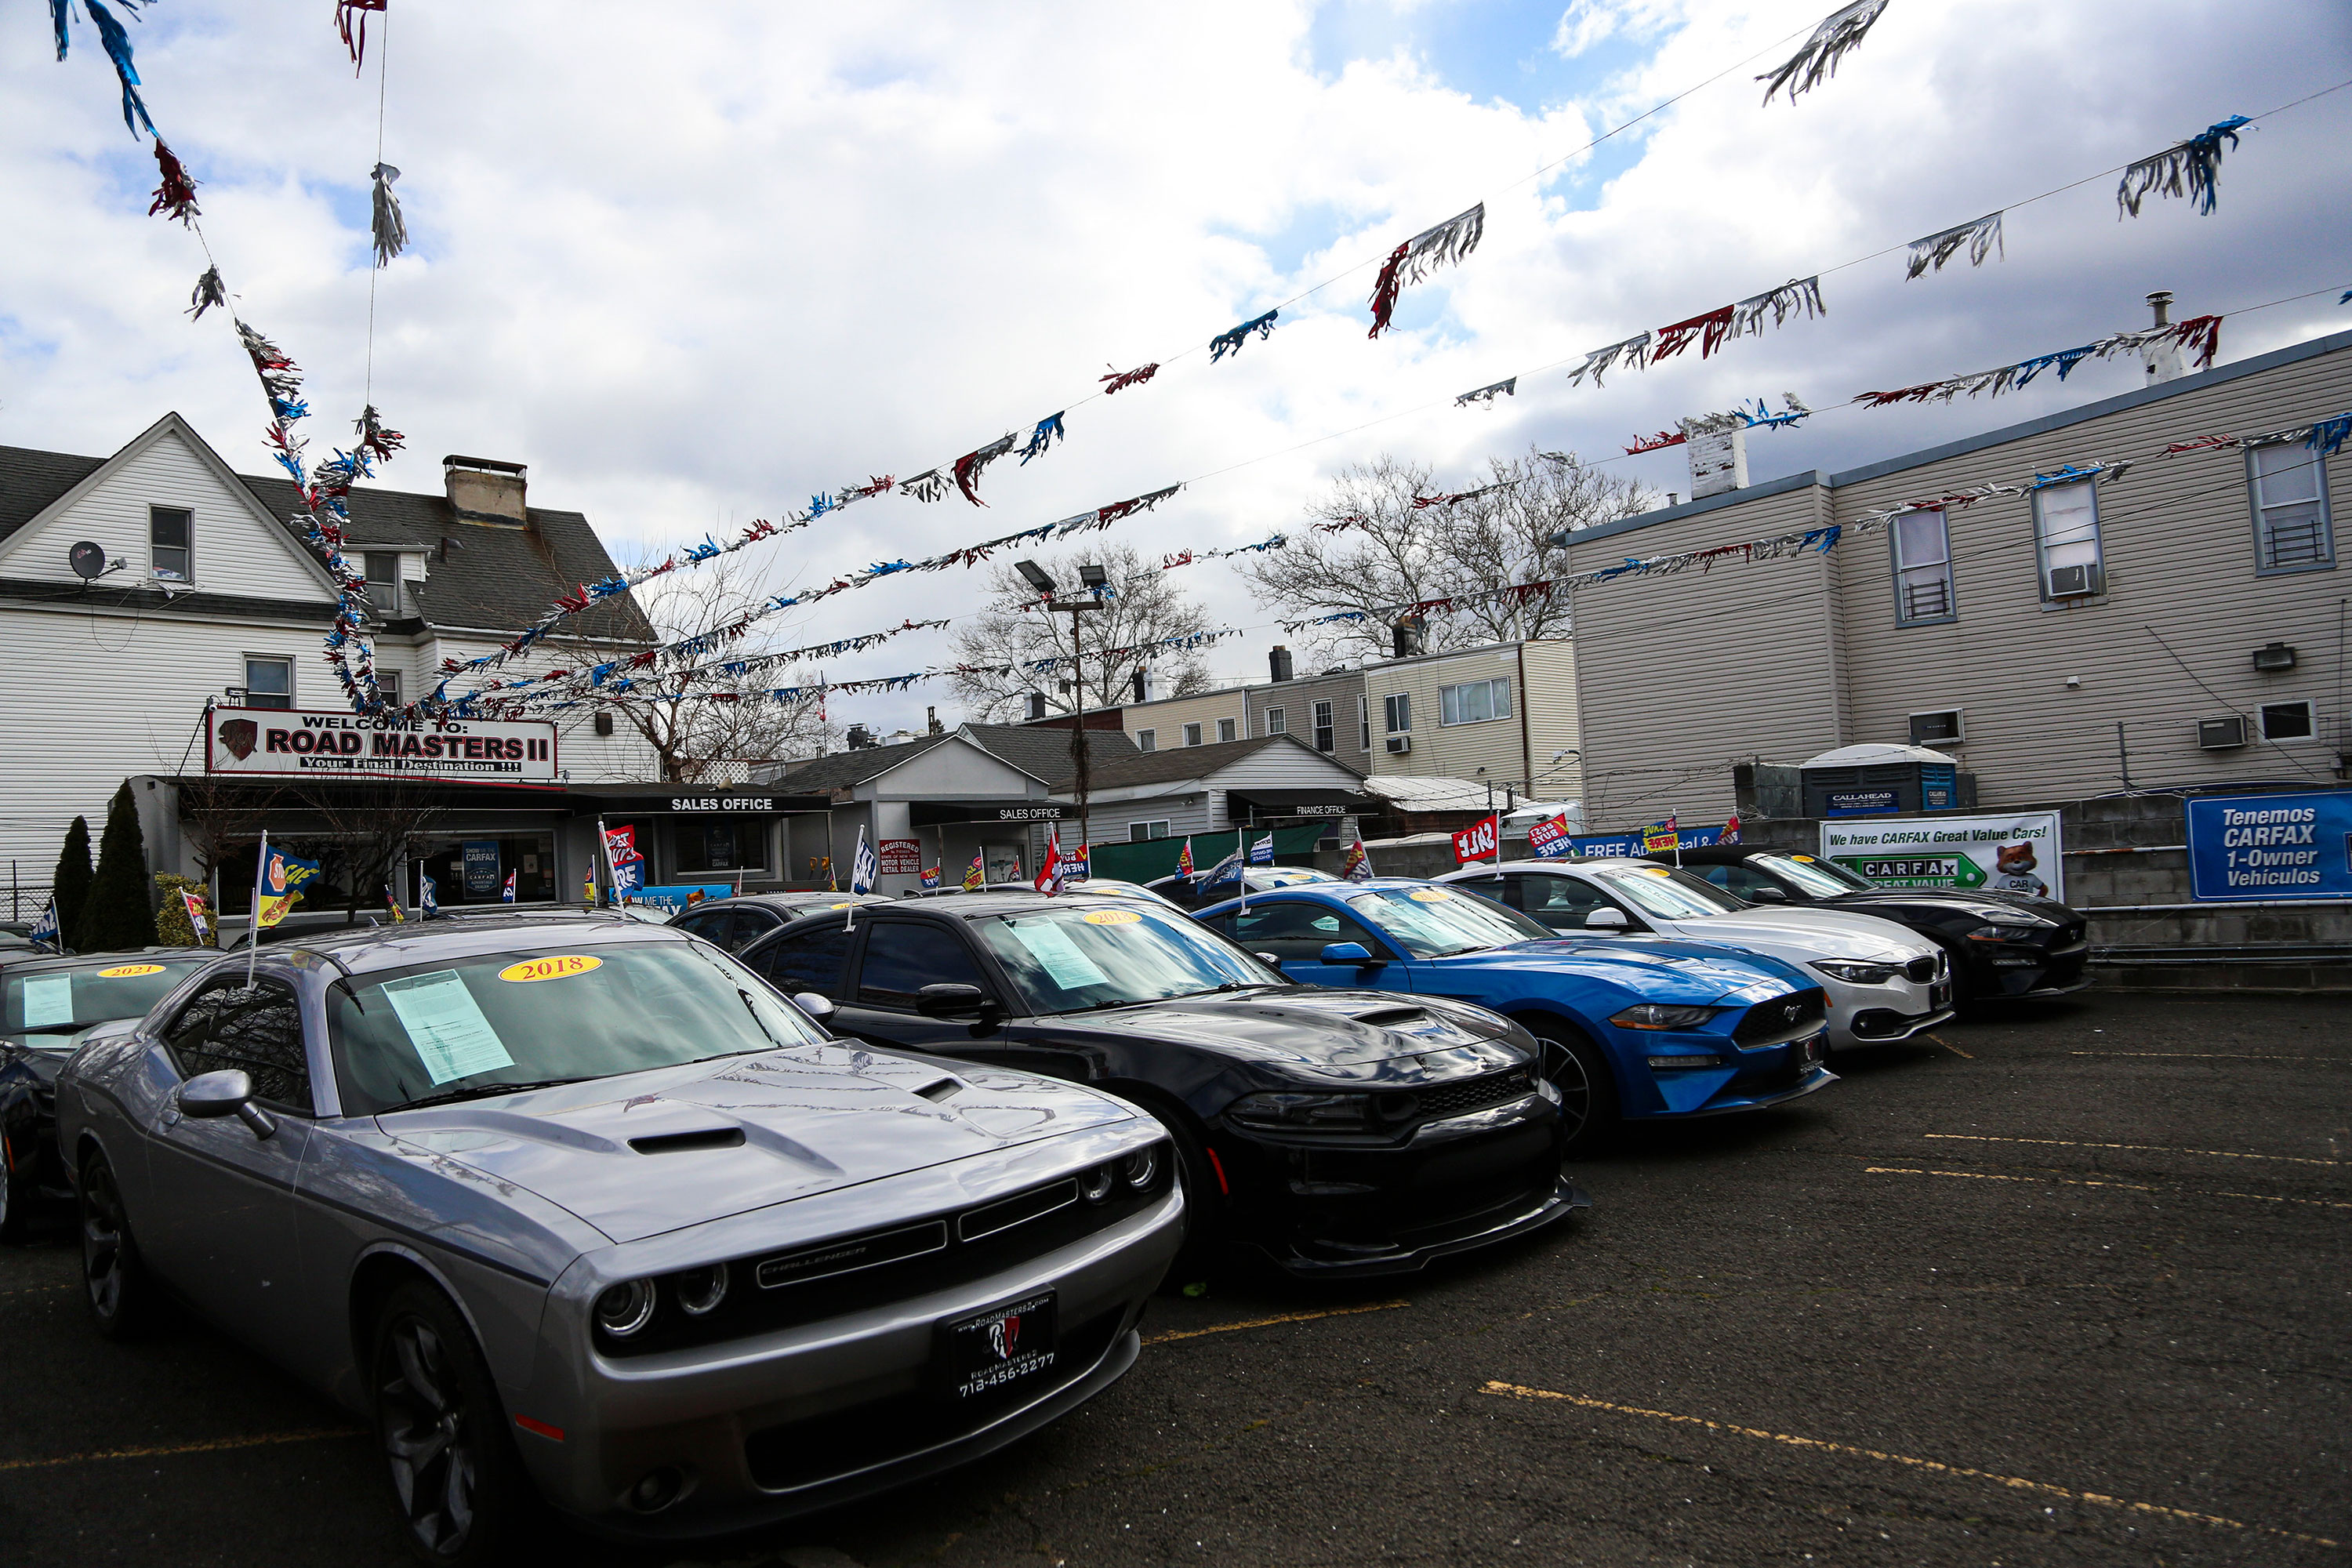 Used cars sit on lot at a dealership in Queens, New York, in January.